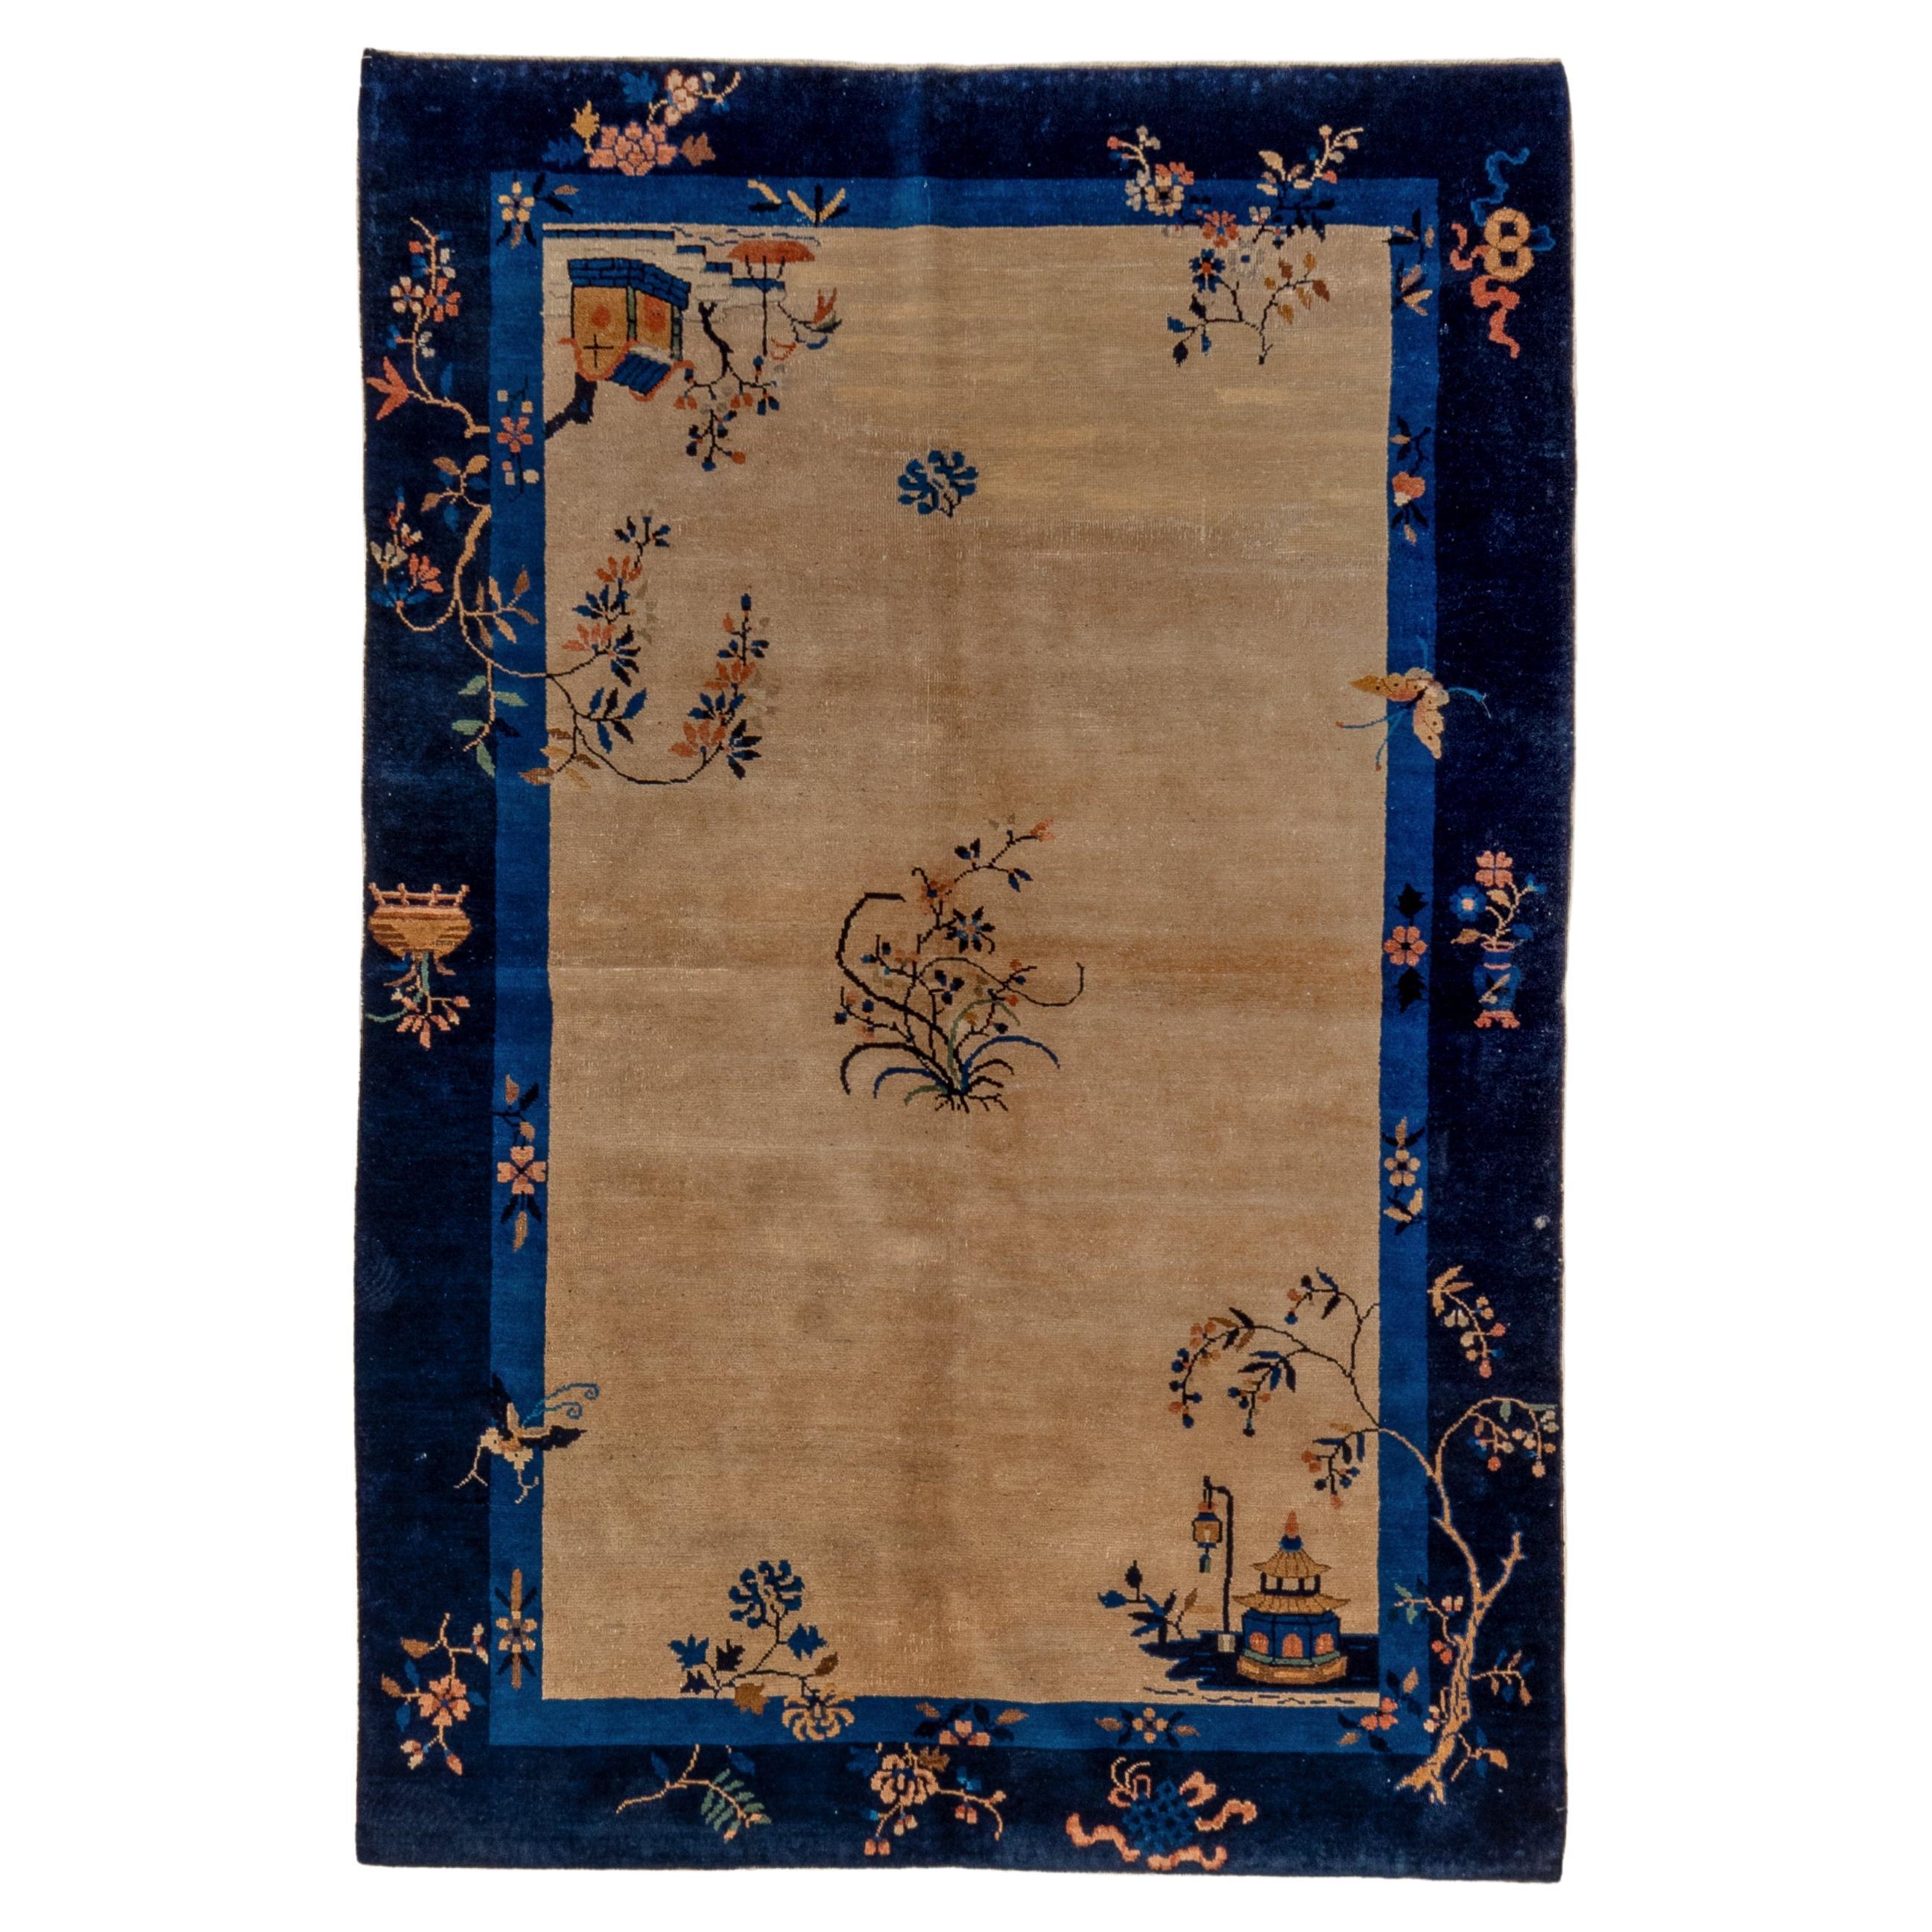 Interwar Art Deco Chinese Rug with a Straw Field and a Blue Border For Sale